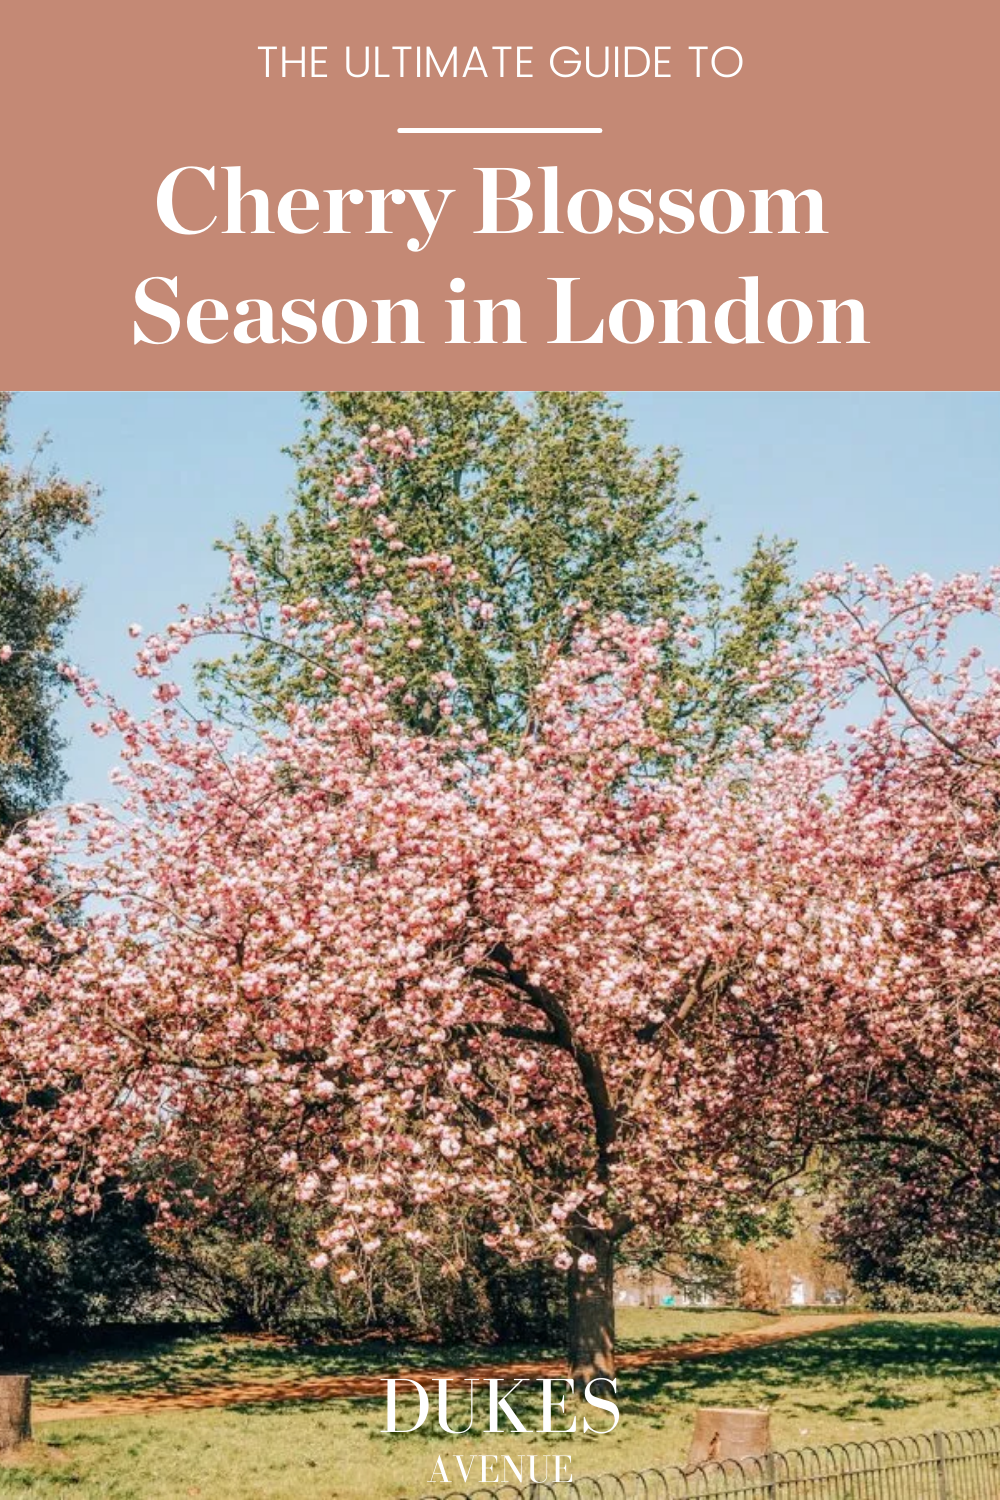 A cherry blossom tree with text overlay "The Ultimate Guide to Cherry Blossom Season in London"